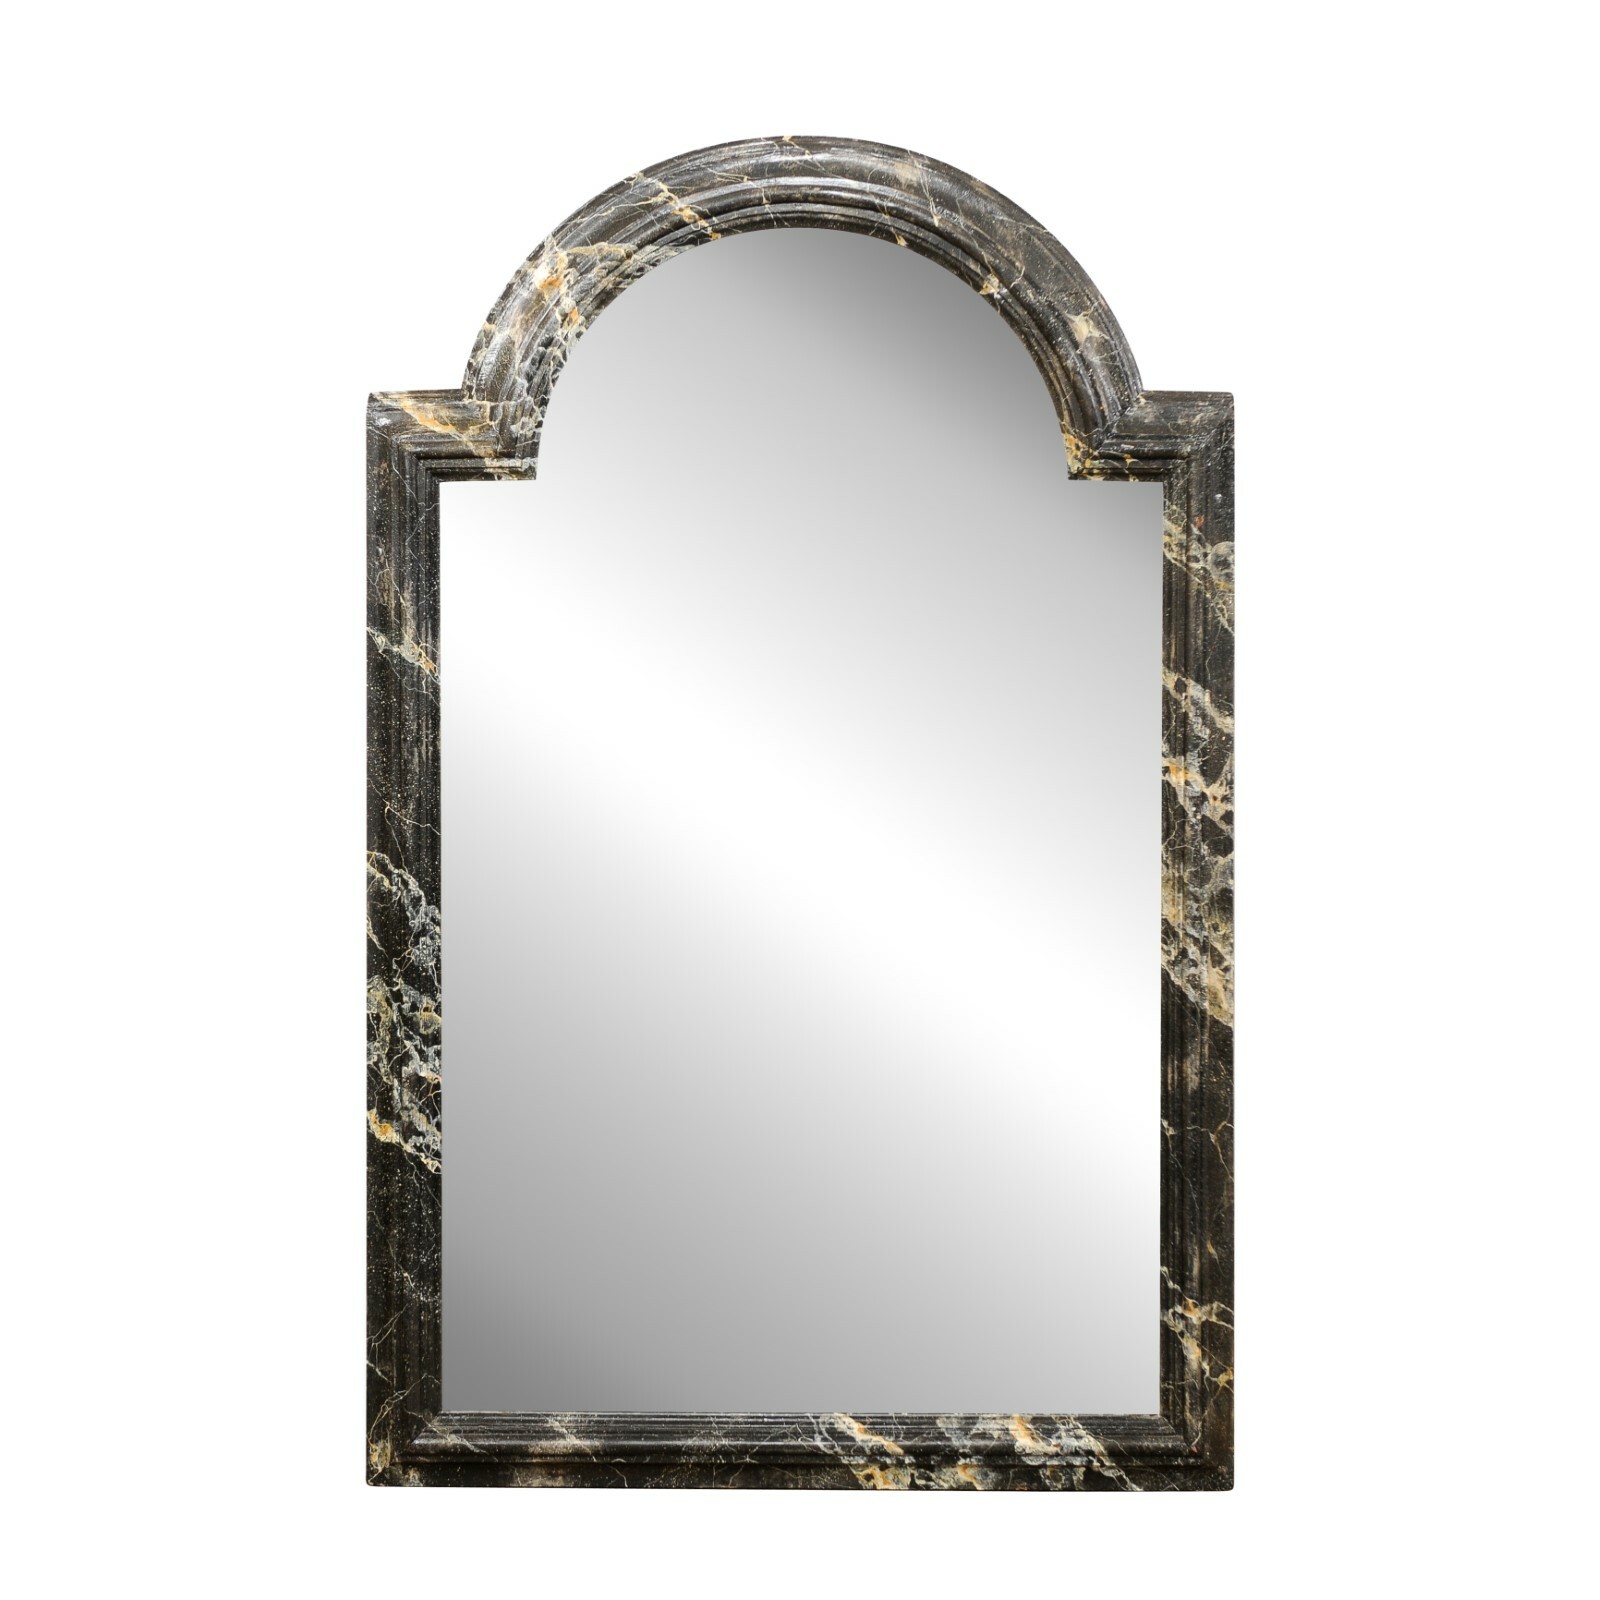 18th C. French Arched Mirror, Faux-Marbled